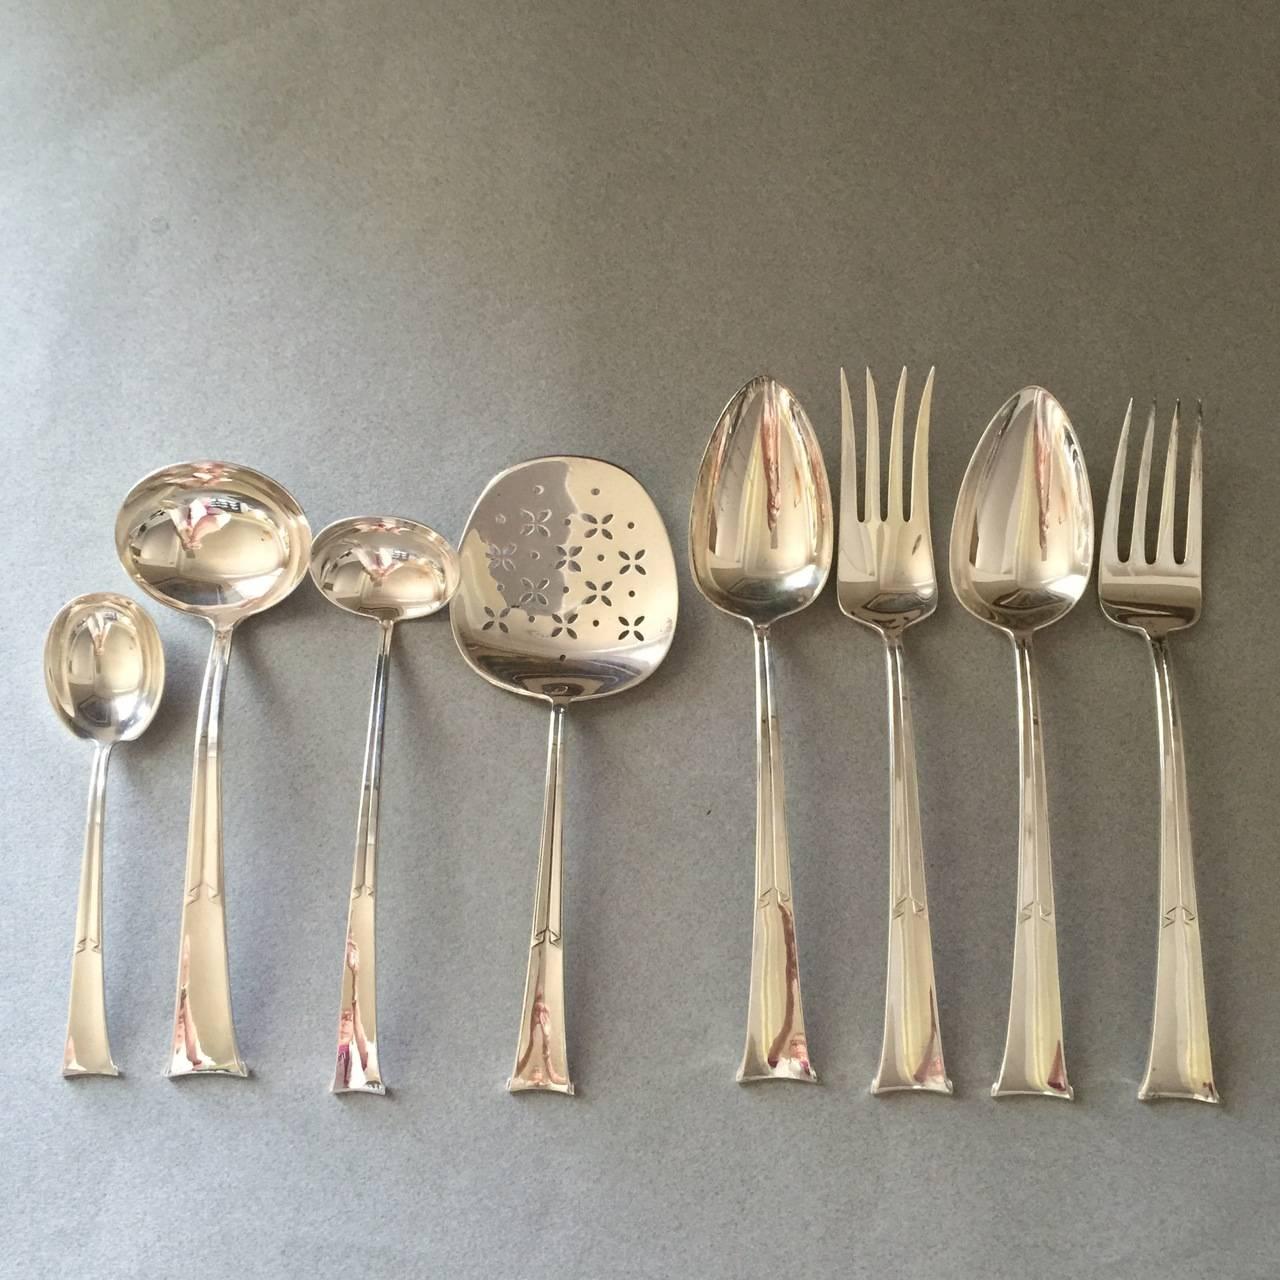 Tiffany & Co. sterling silver linenfold pattern service for 12.

Highly sought after sterling silver flatware in the Mid-Century Modern 